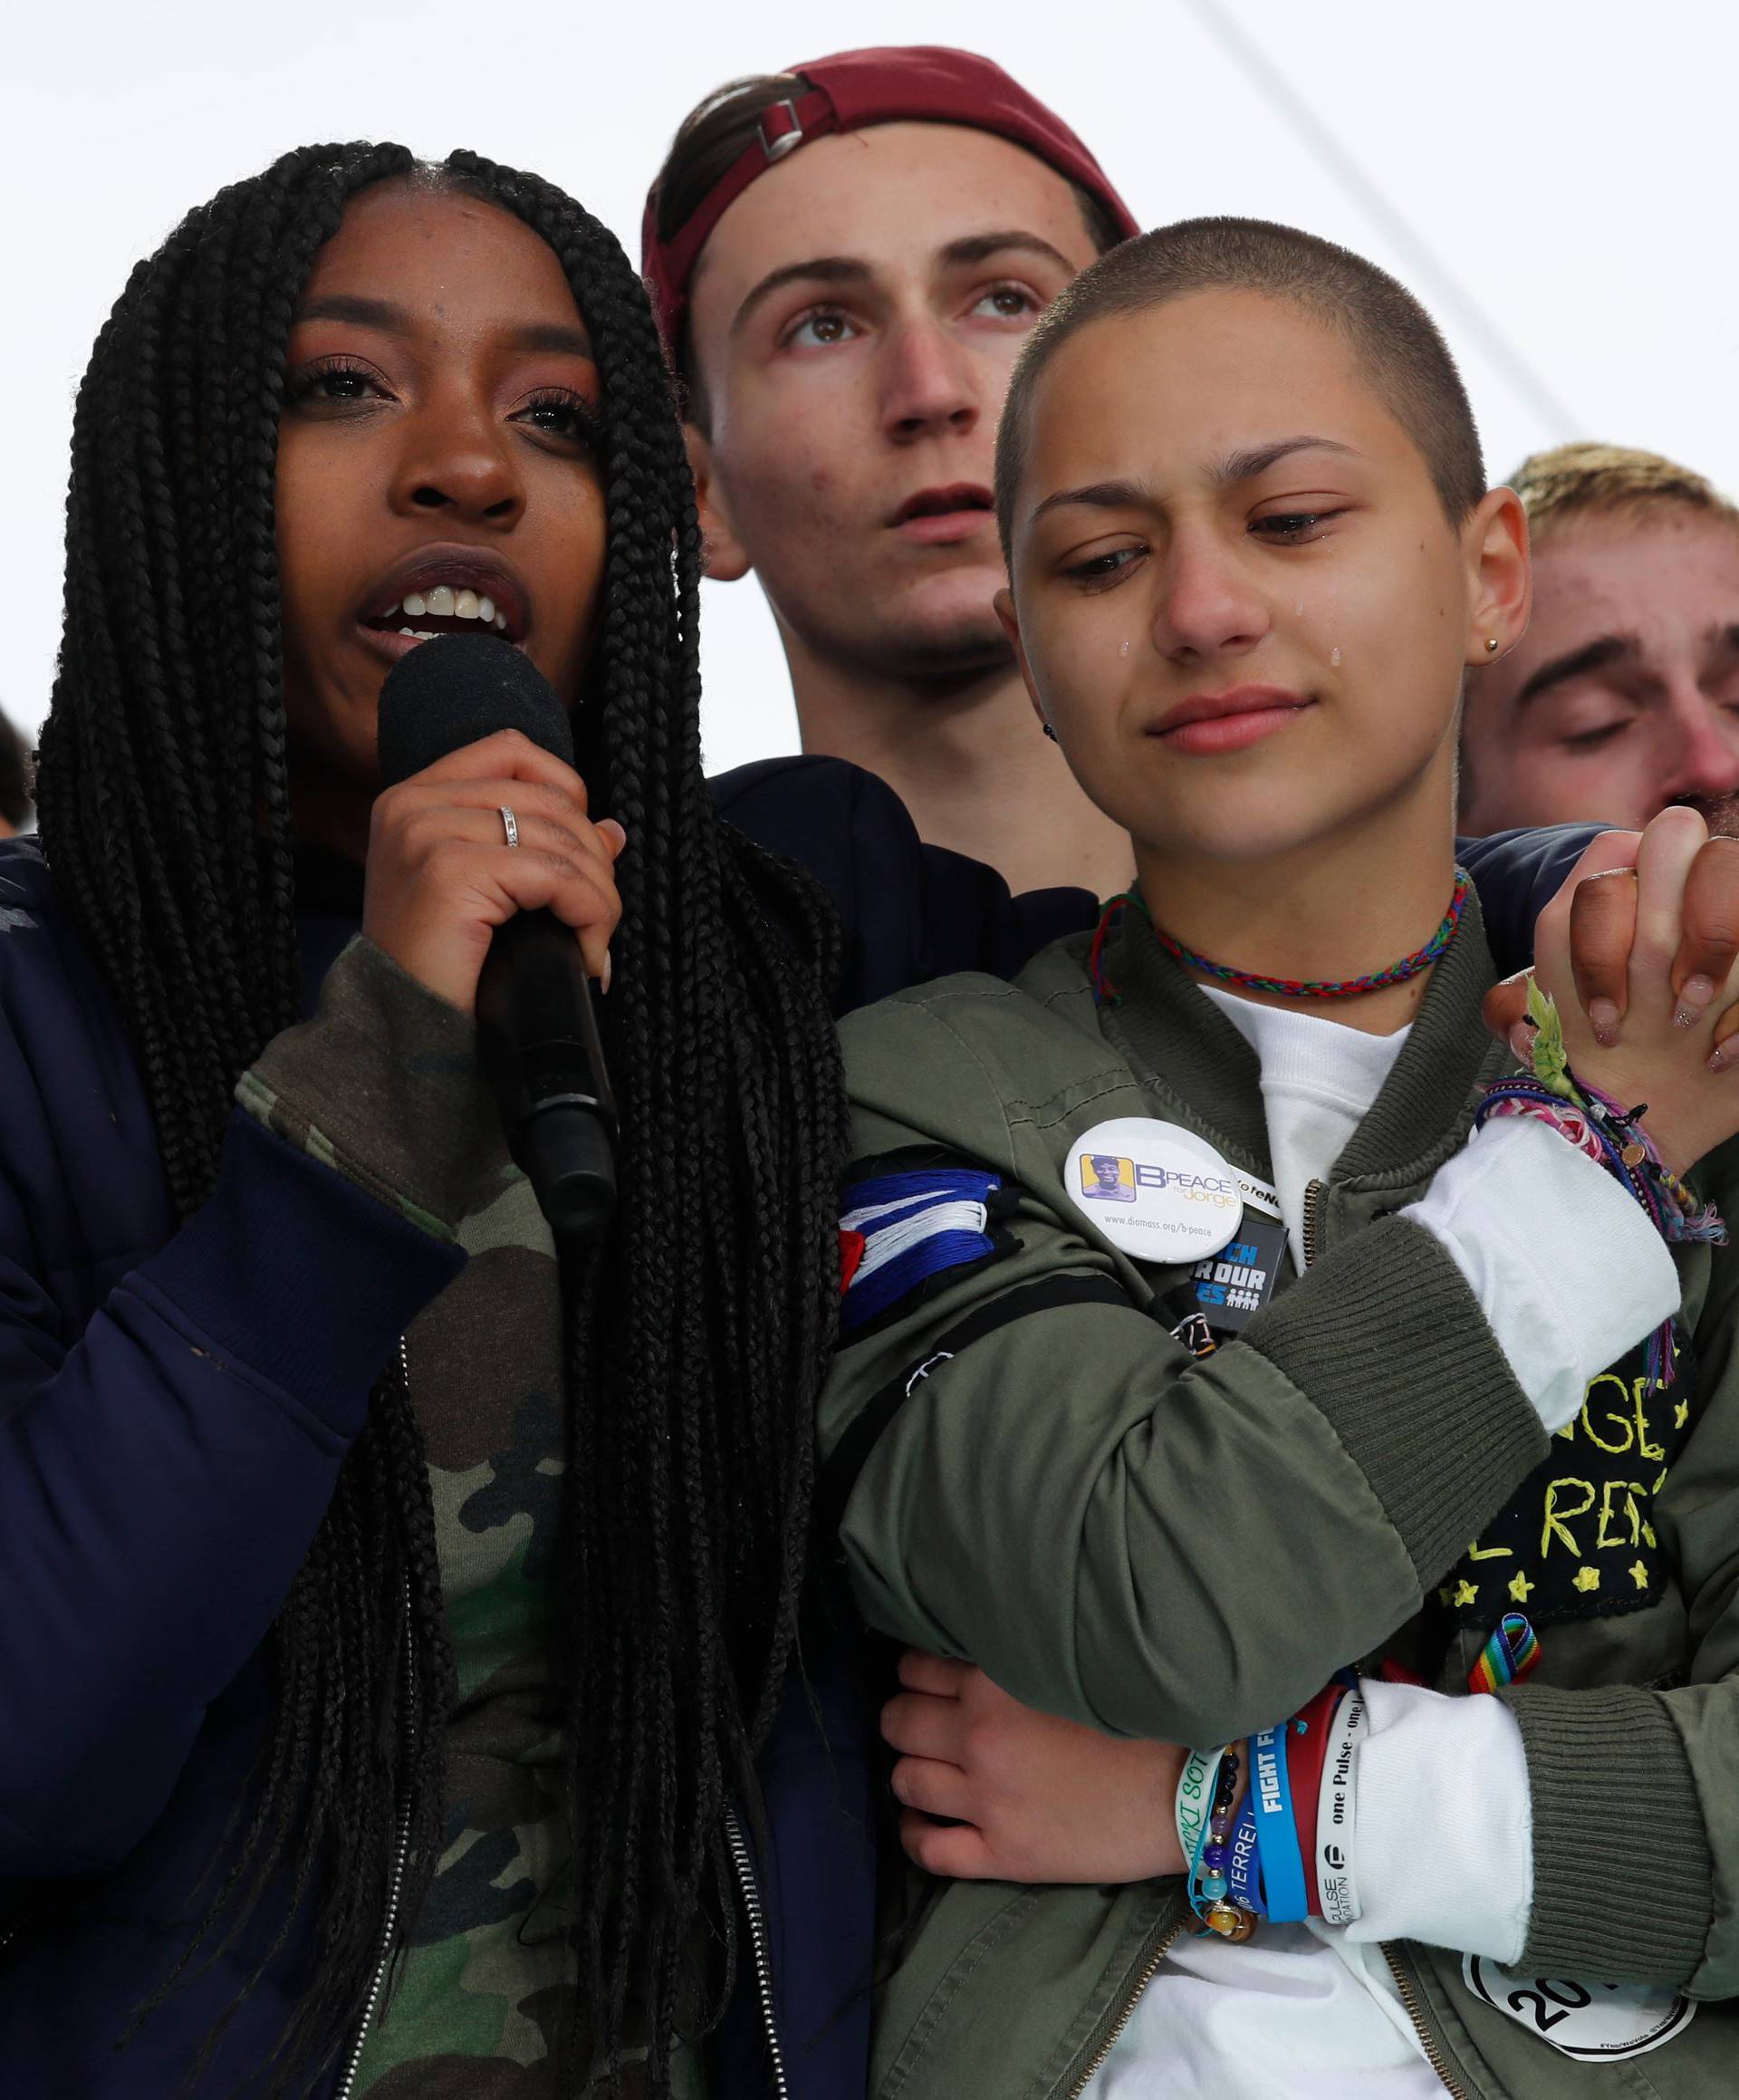 Students and young people gather for the "March for Our Lives" rally demanding gun control in Washington